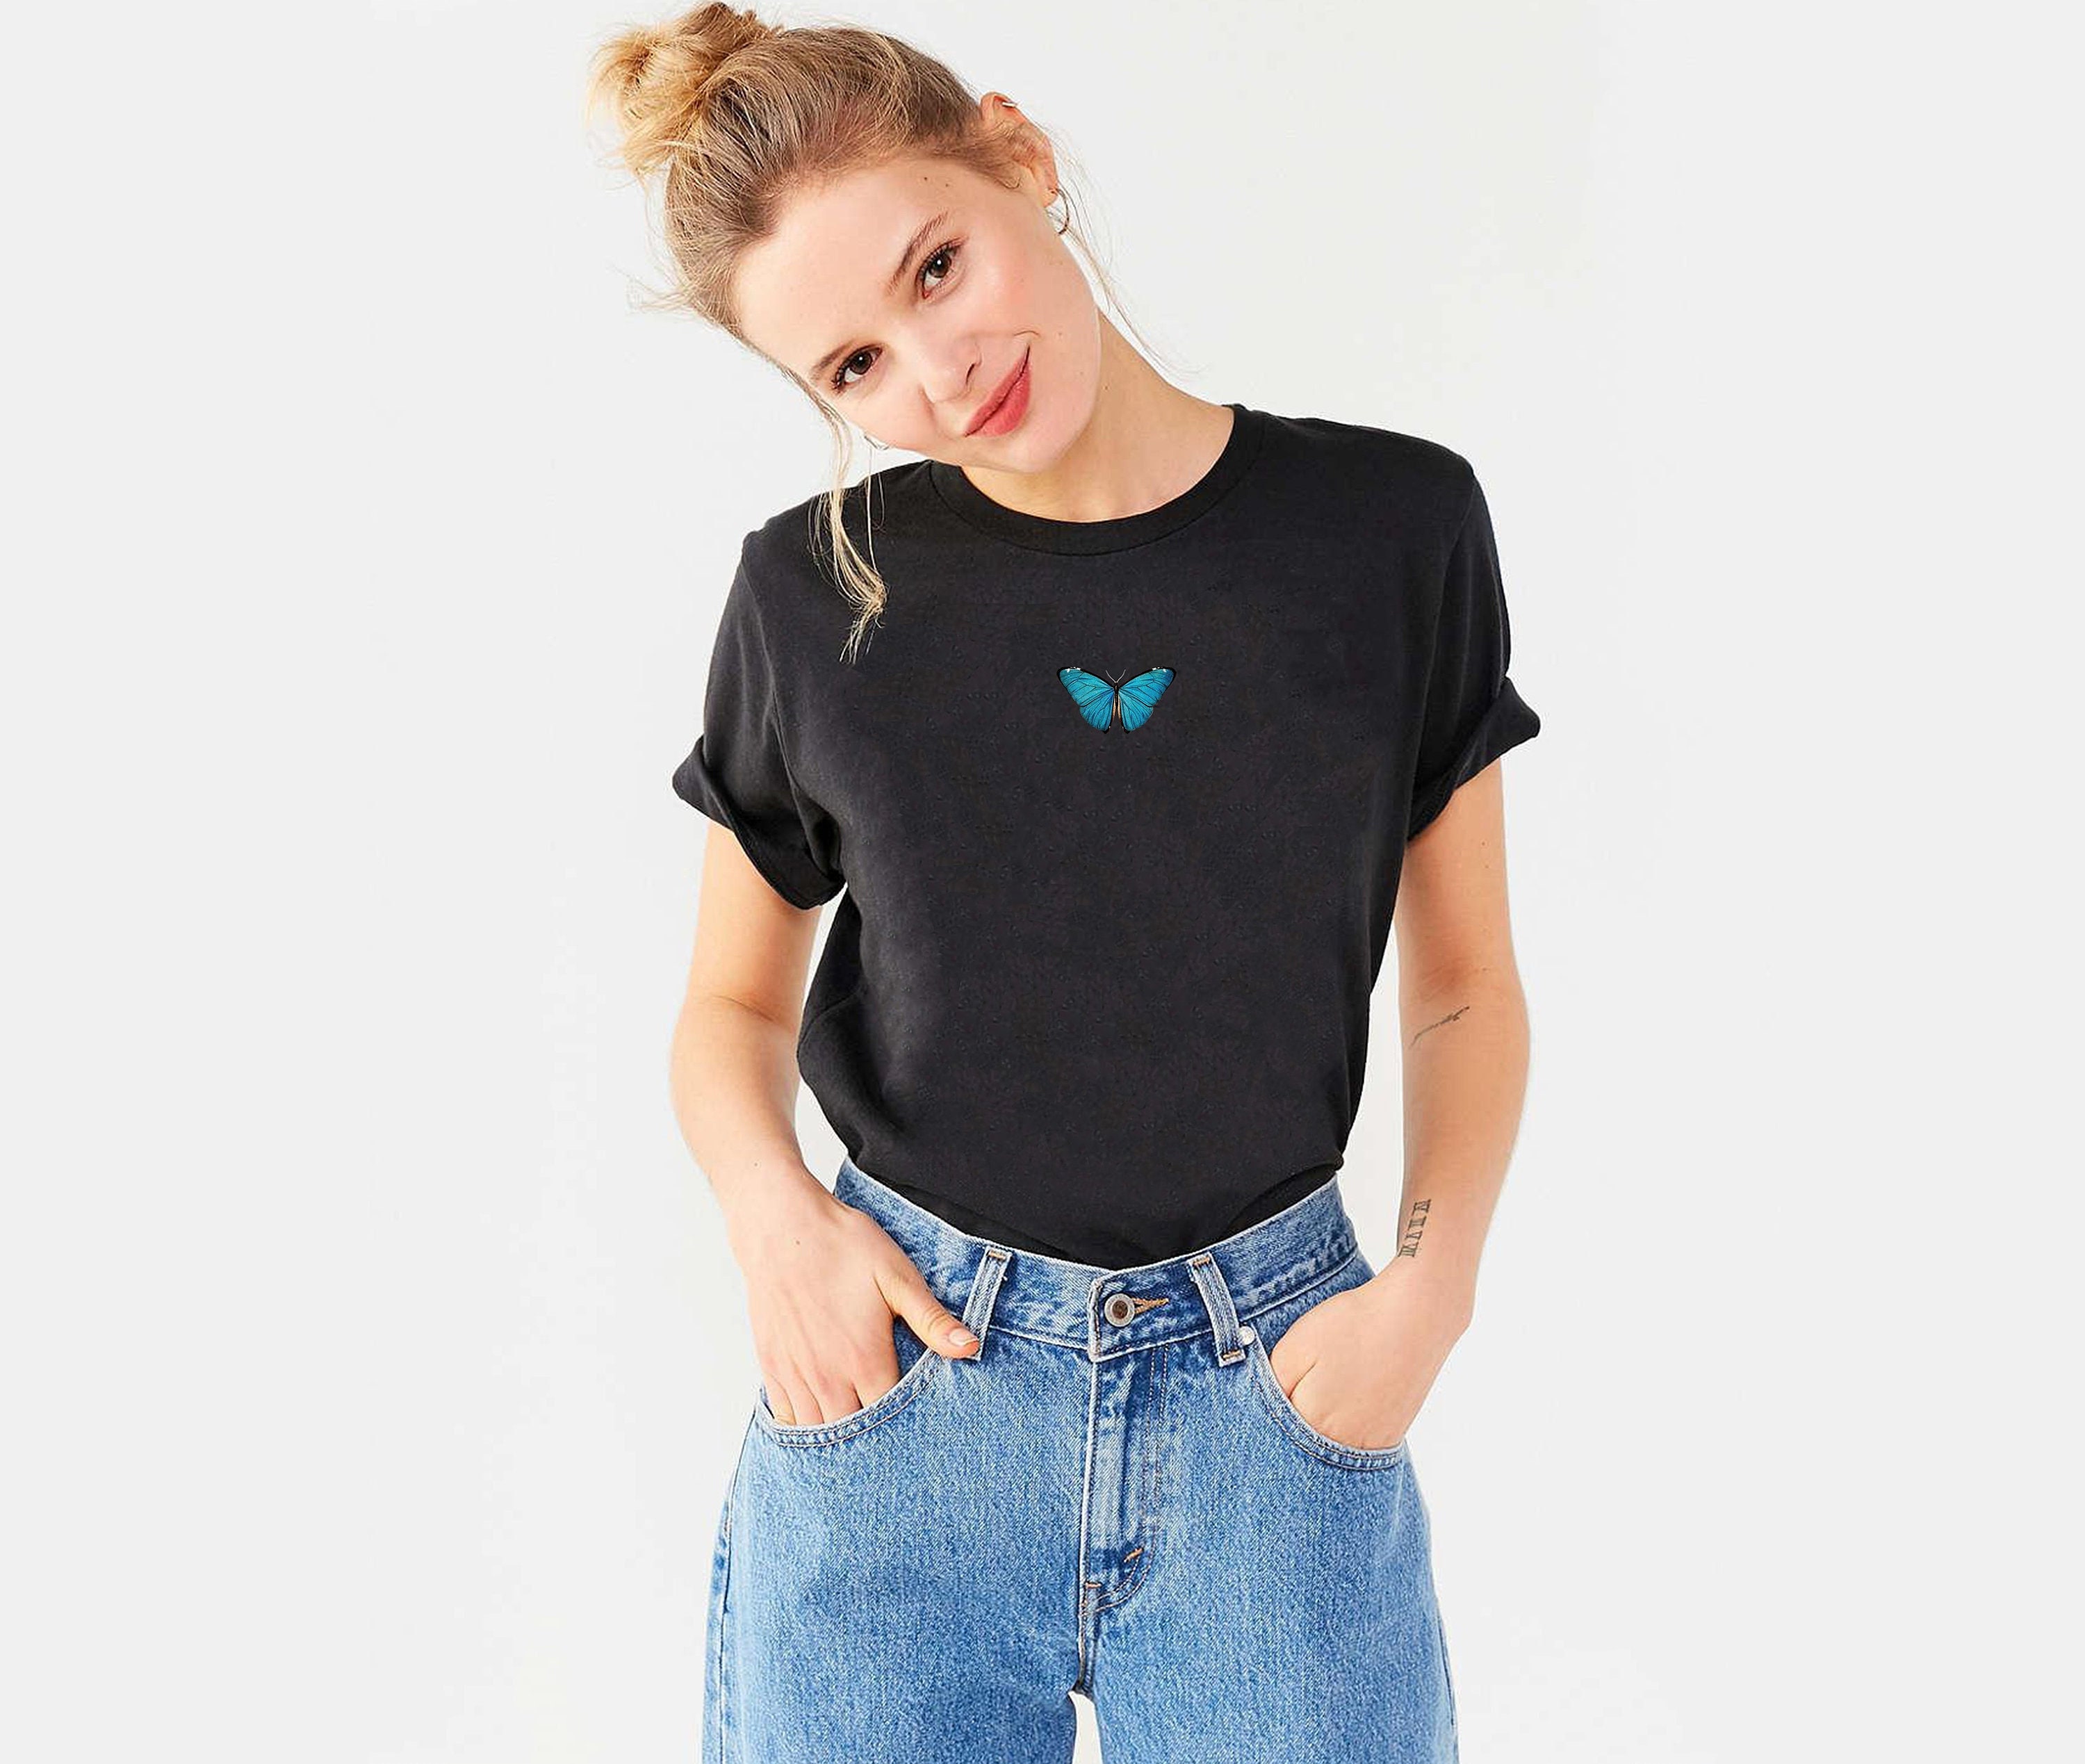 Blue Shirt Butterfly Etsy -